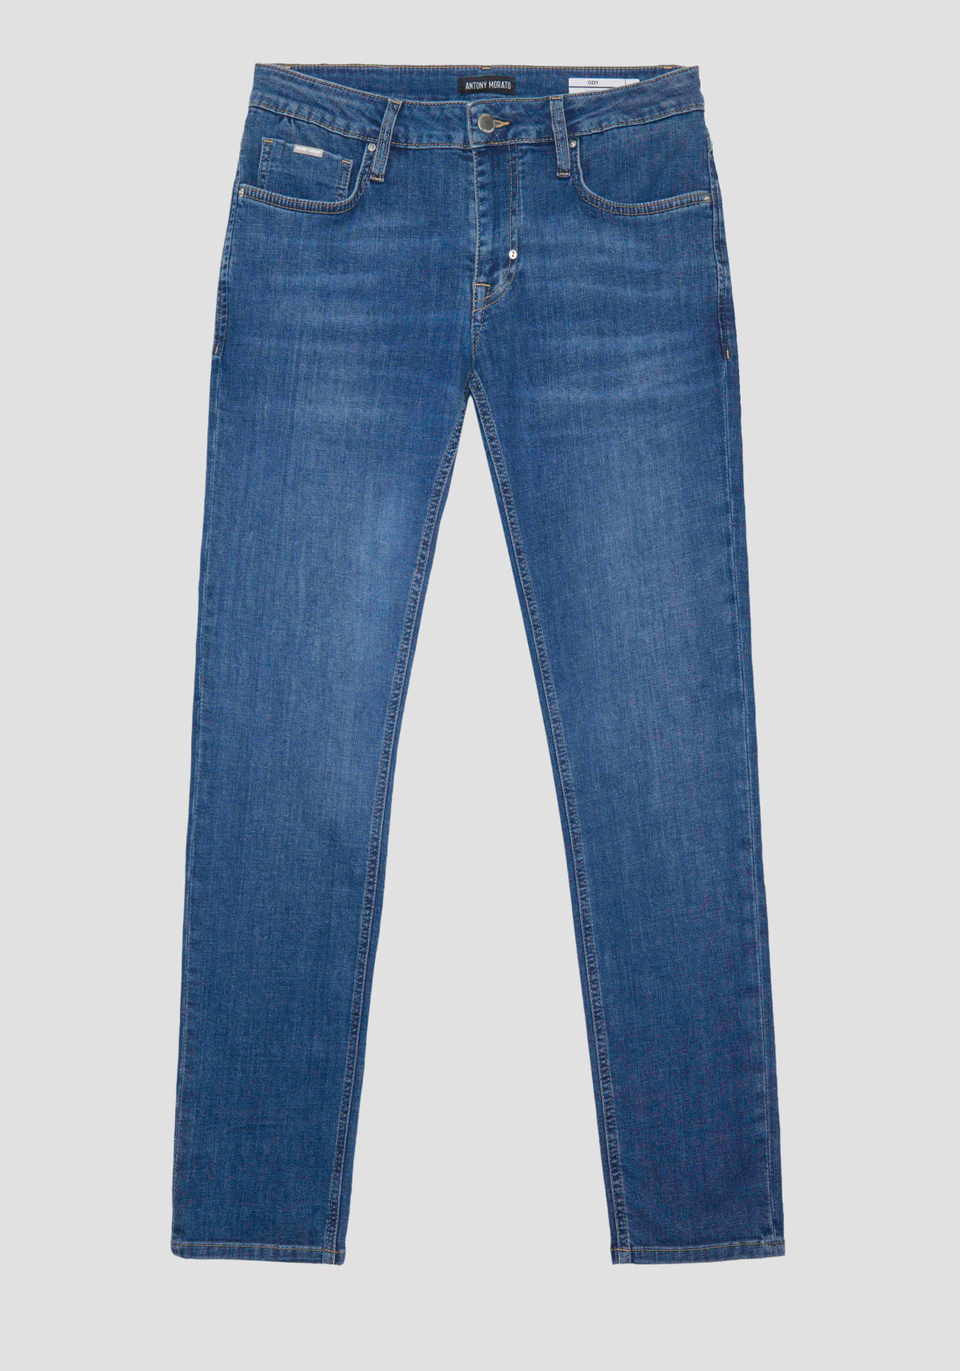 "OZZY" TAPERED FIT JEANS IN ICONIC BASIC BLUE DENIM - Antony Morato Online Shop